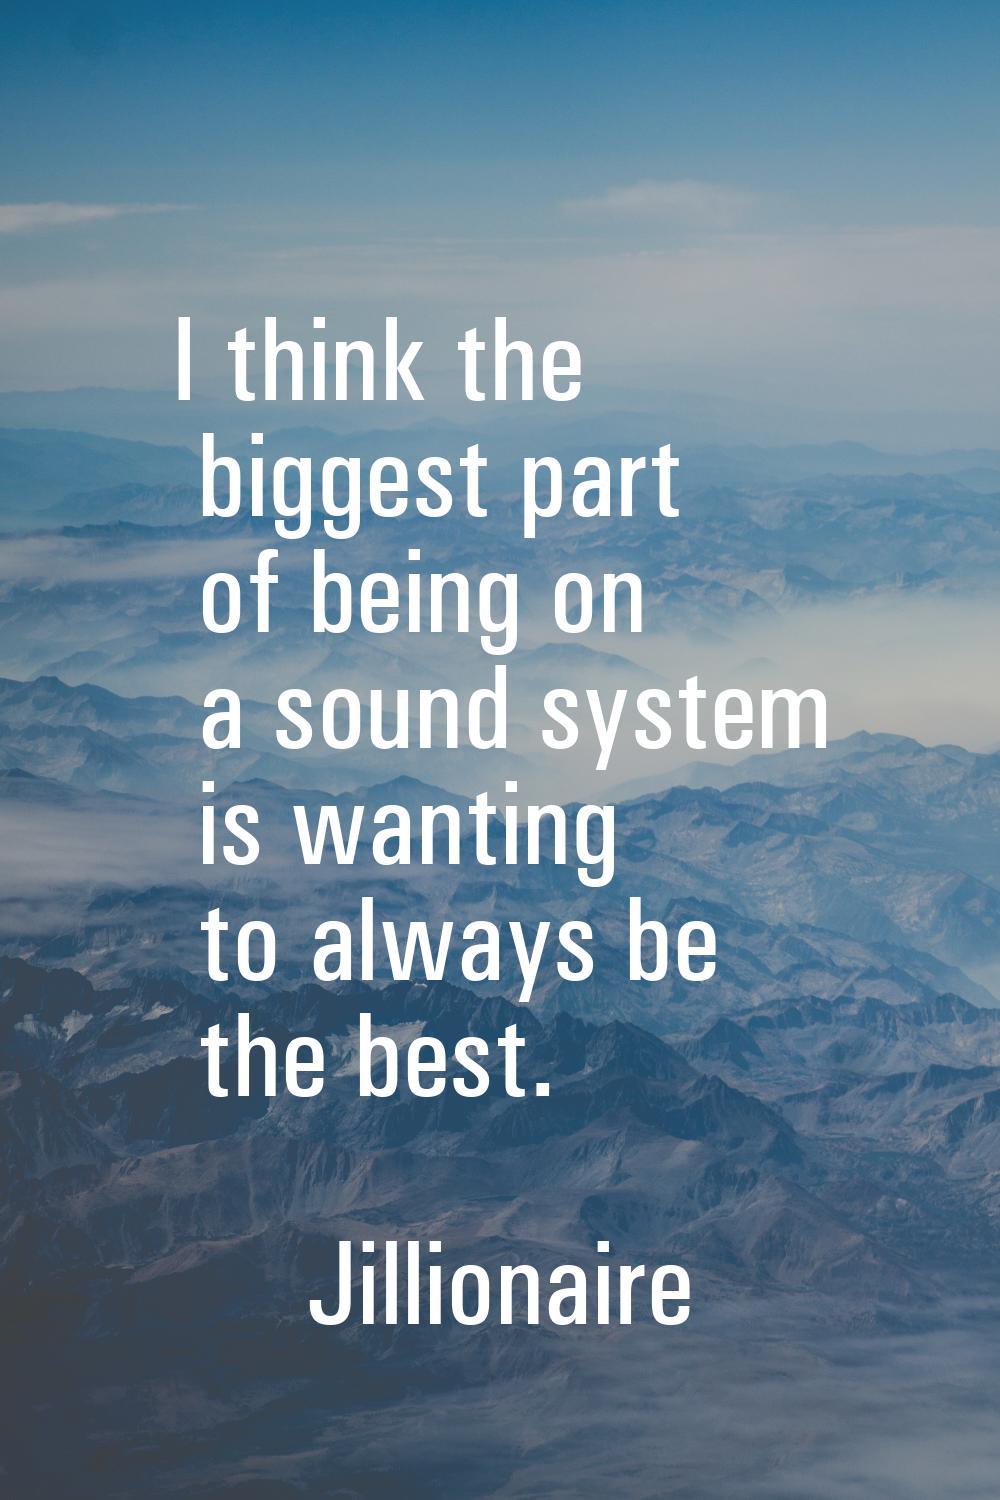 I think the biggest part of being on a sound system is wanting to always be the best.